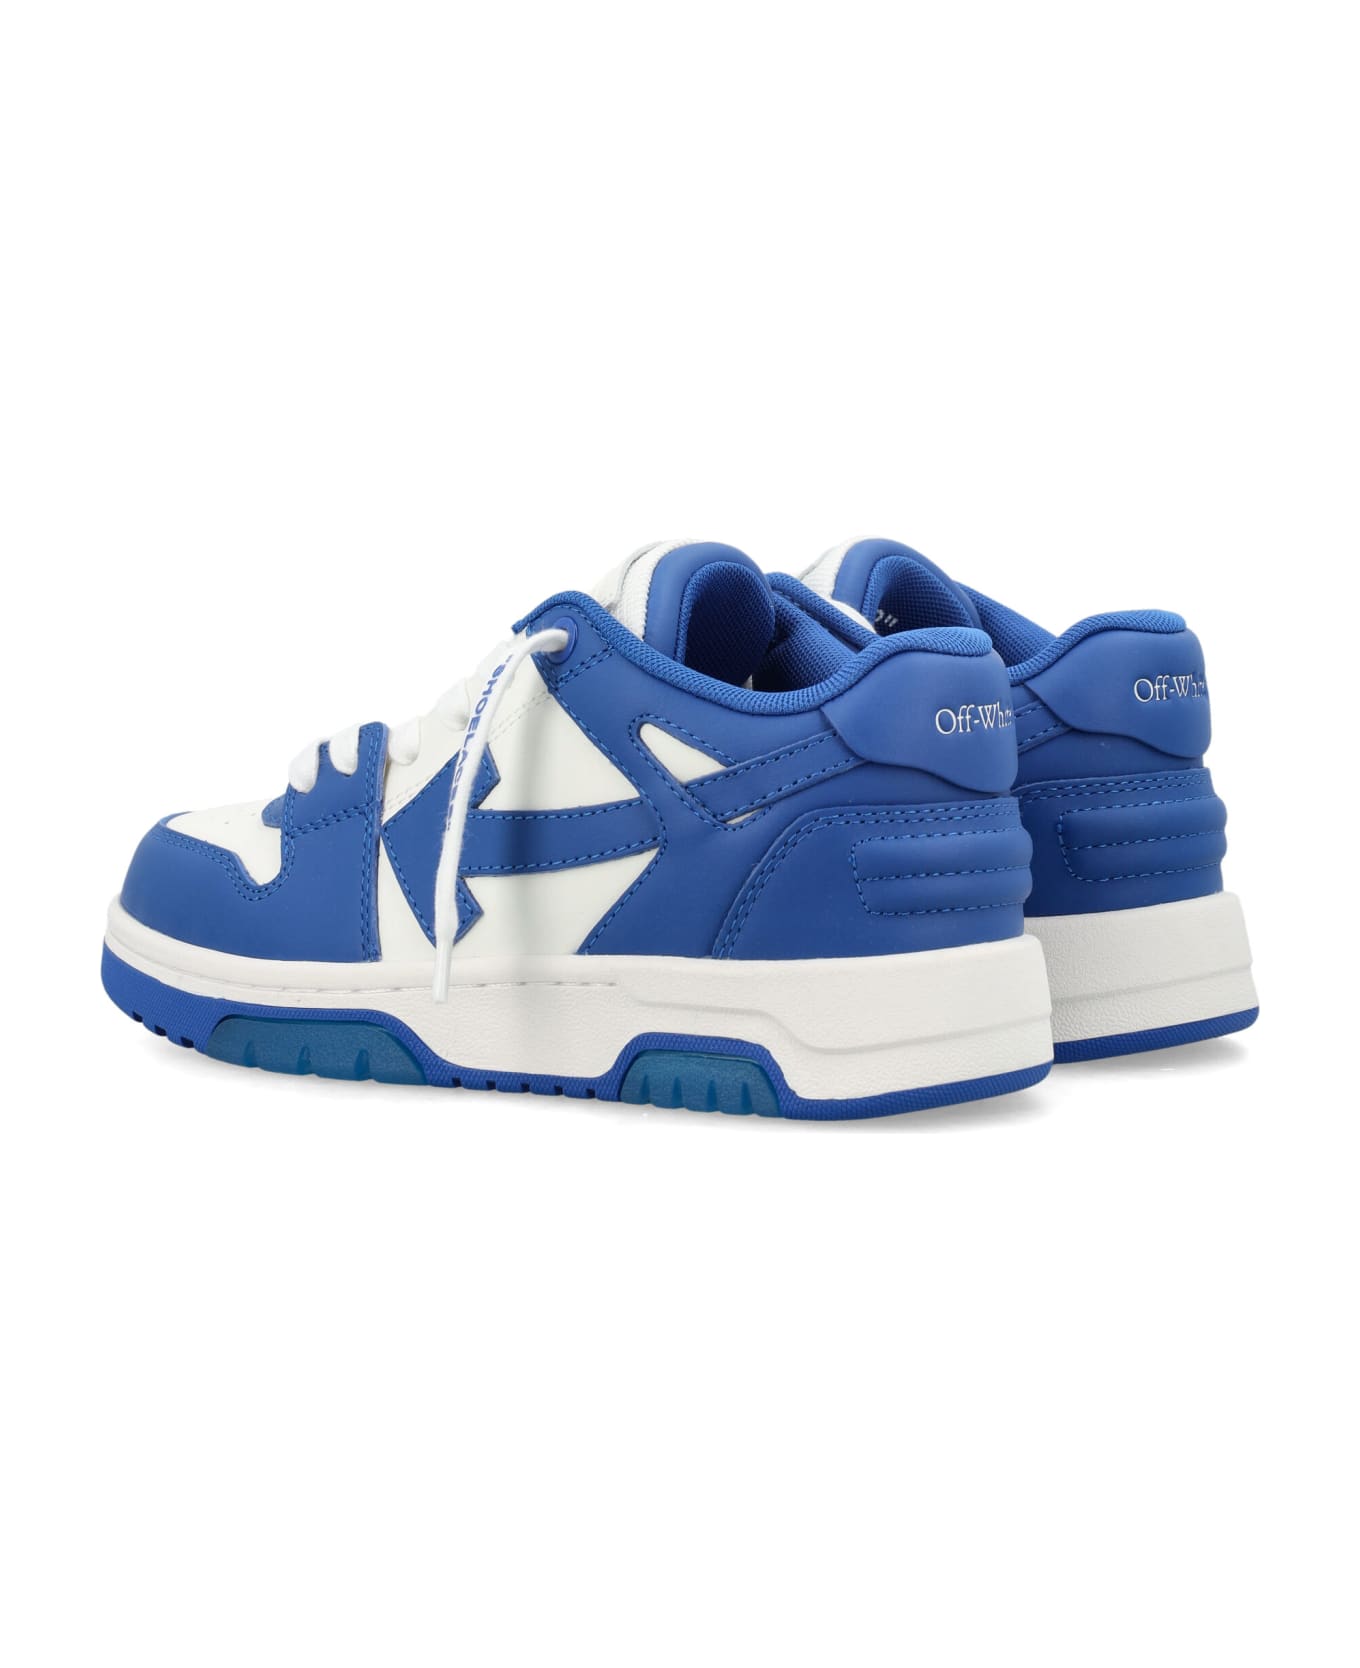 Off-White Out Of Office Sneakers - WHITE BLUE シューズ